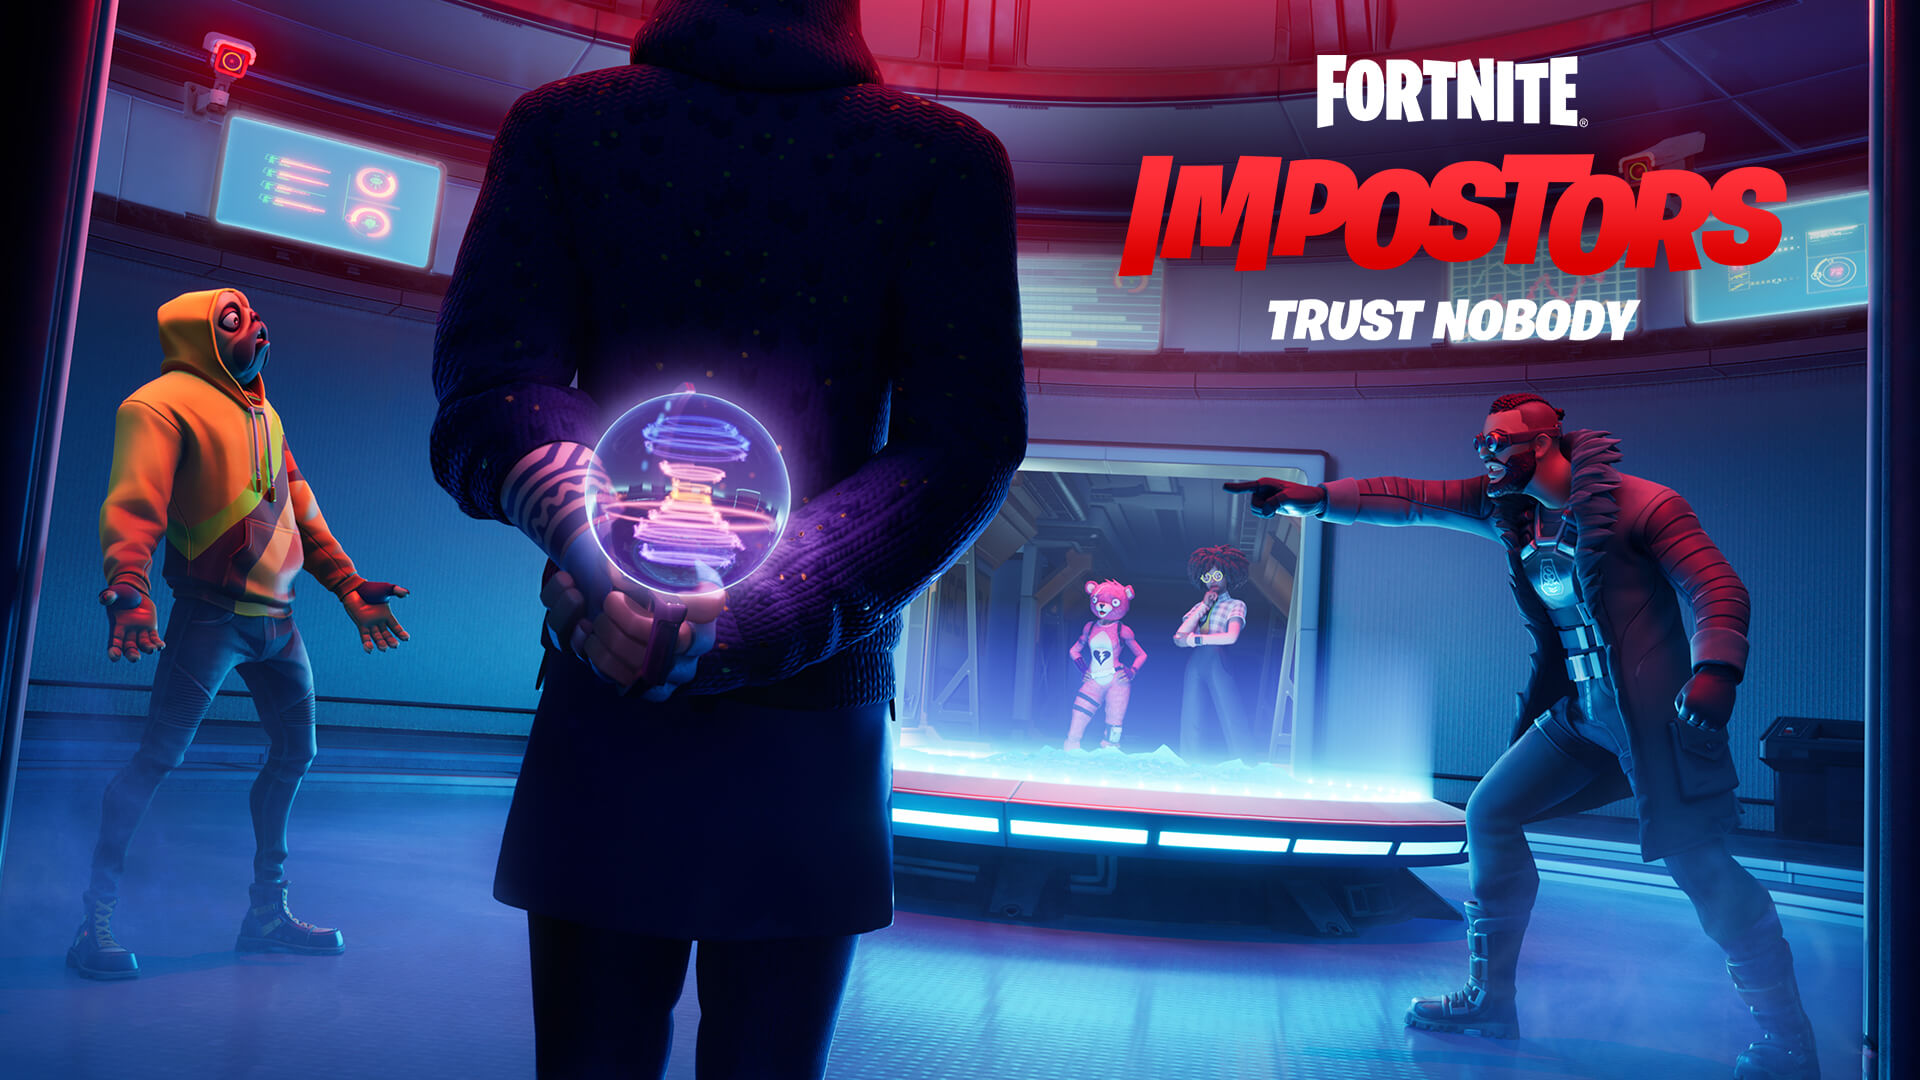 Fortnite Impostors: All about the new crook mode